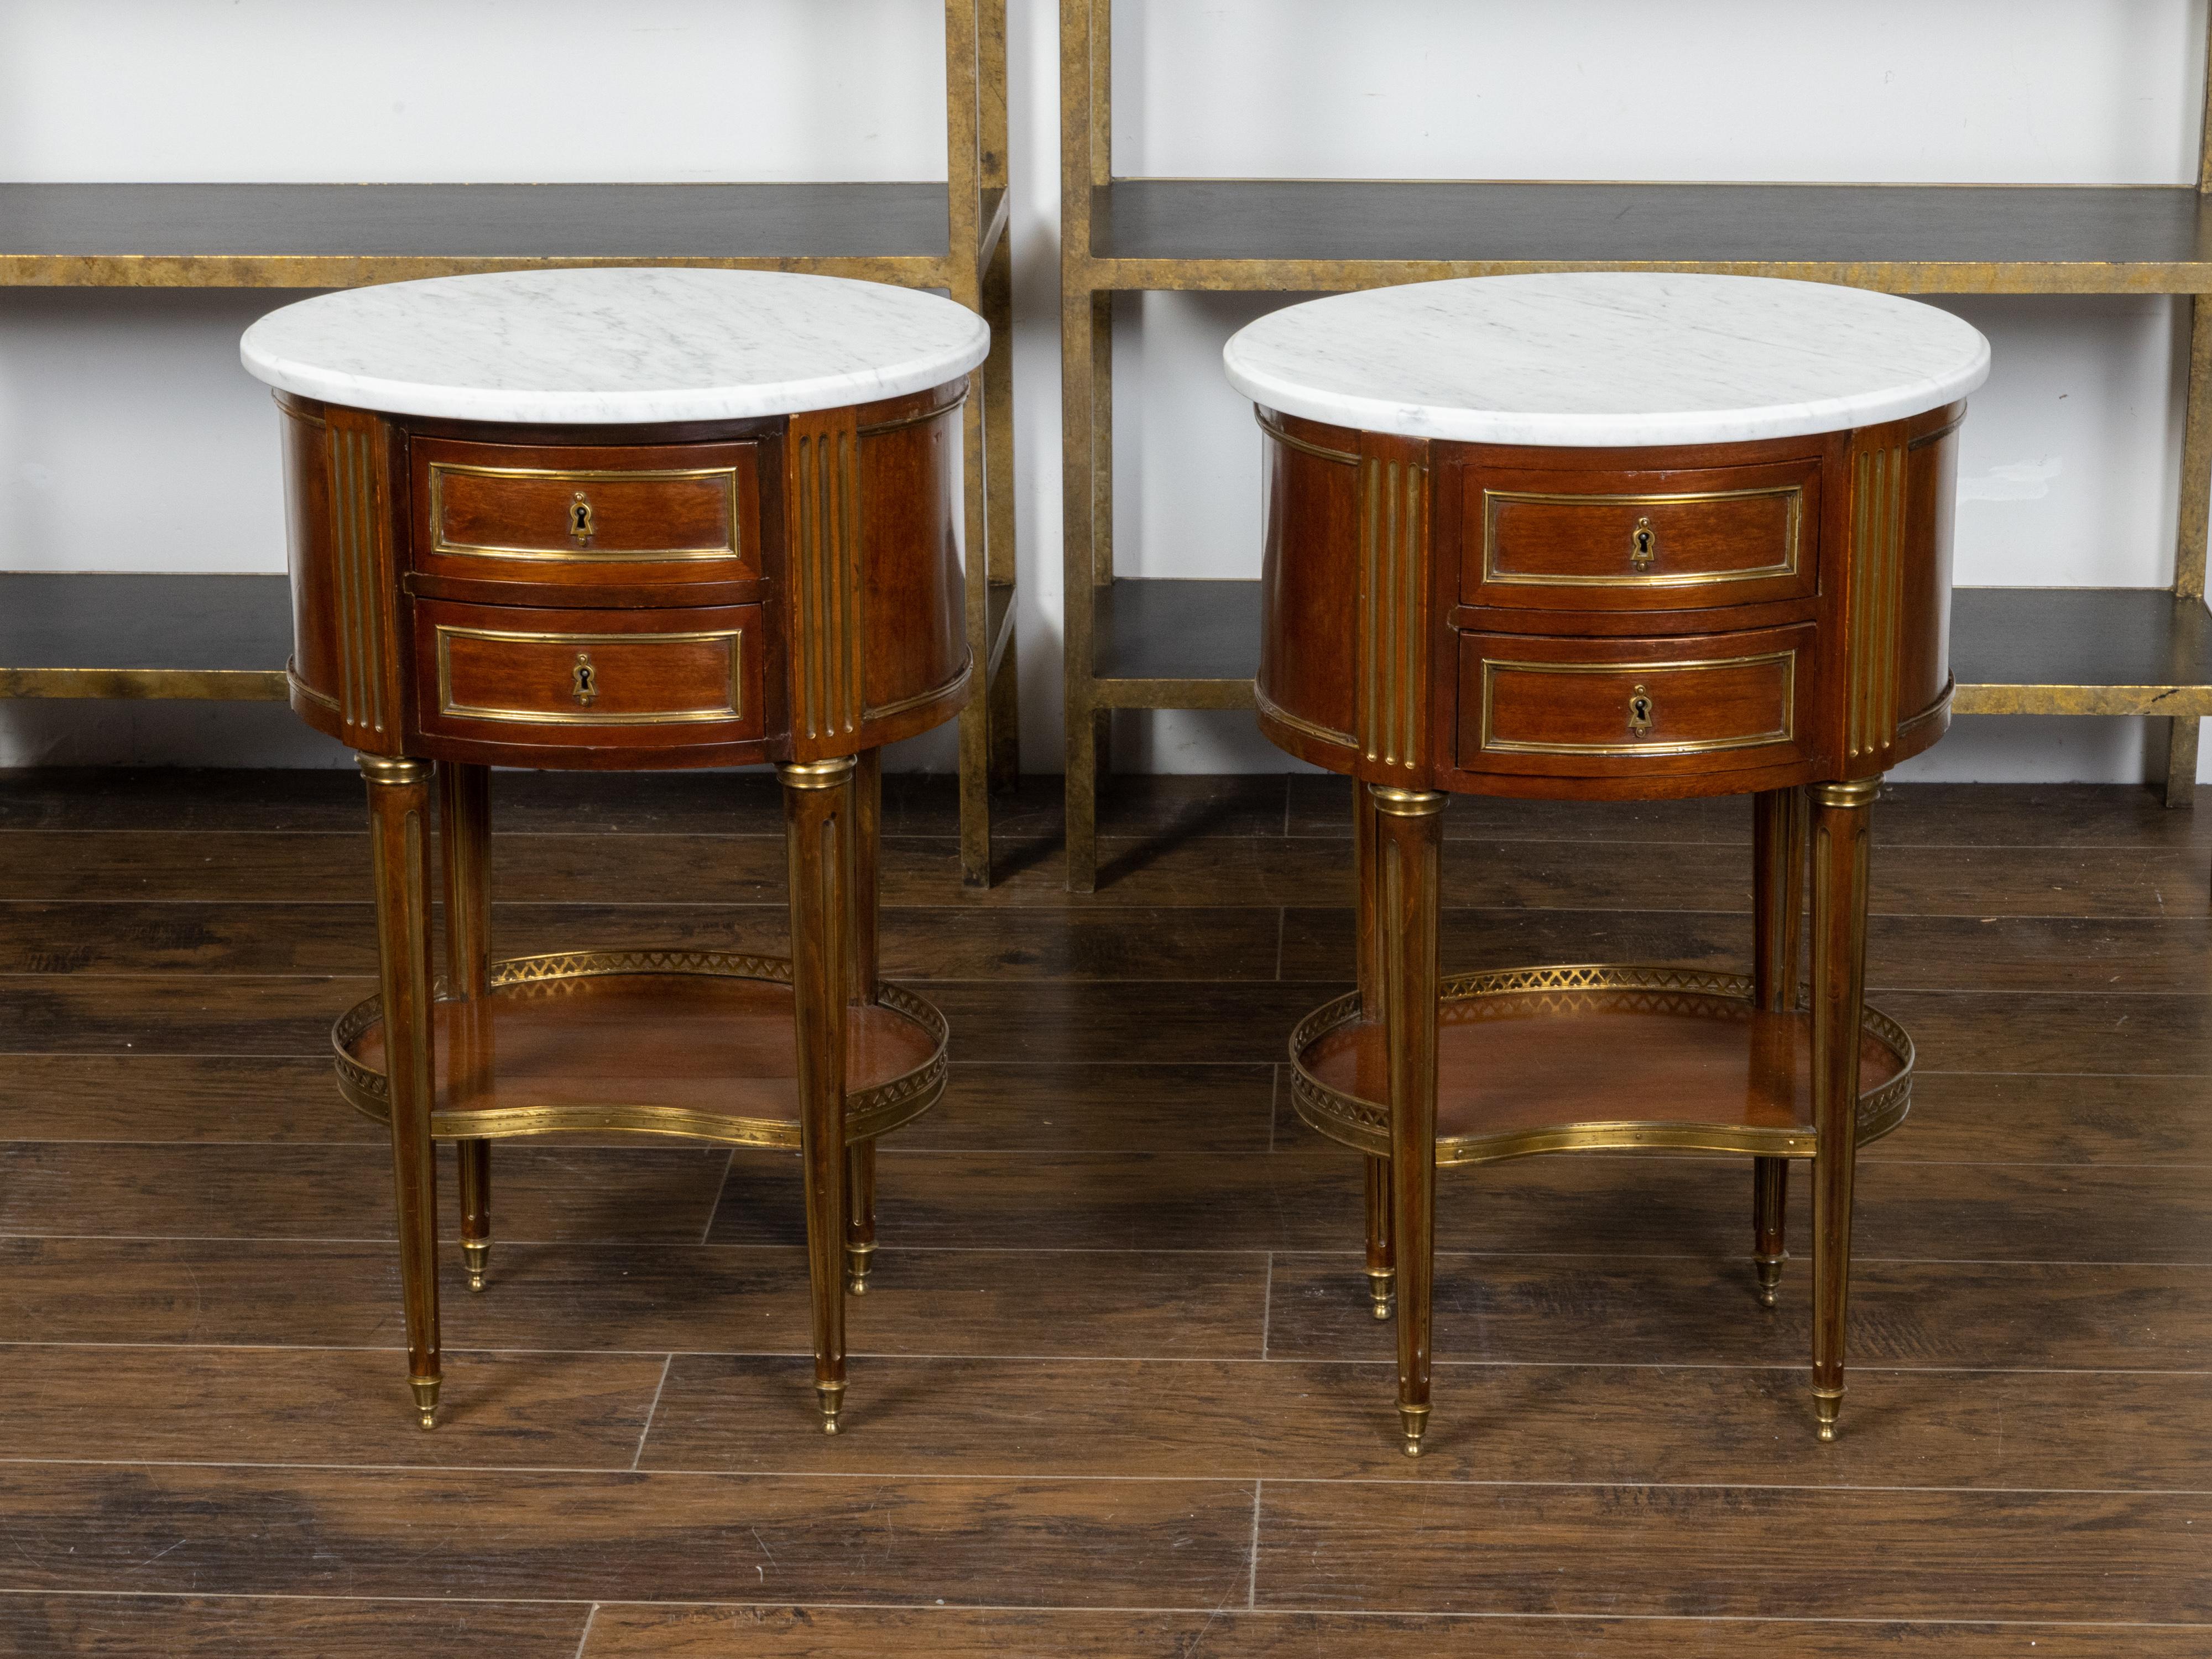 A pair of Italian neoclassical style mahogany bedside tables from the 19th century, with white oval marble tops, two drawers, gilt fluted accents, brass galleries and bean-shaped shelves. Created in Italy during the 19th century, each of this pair